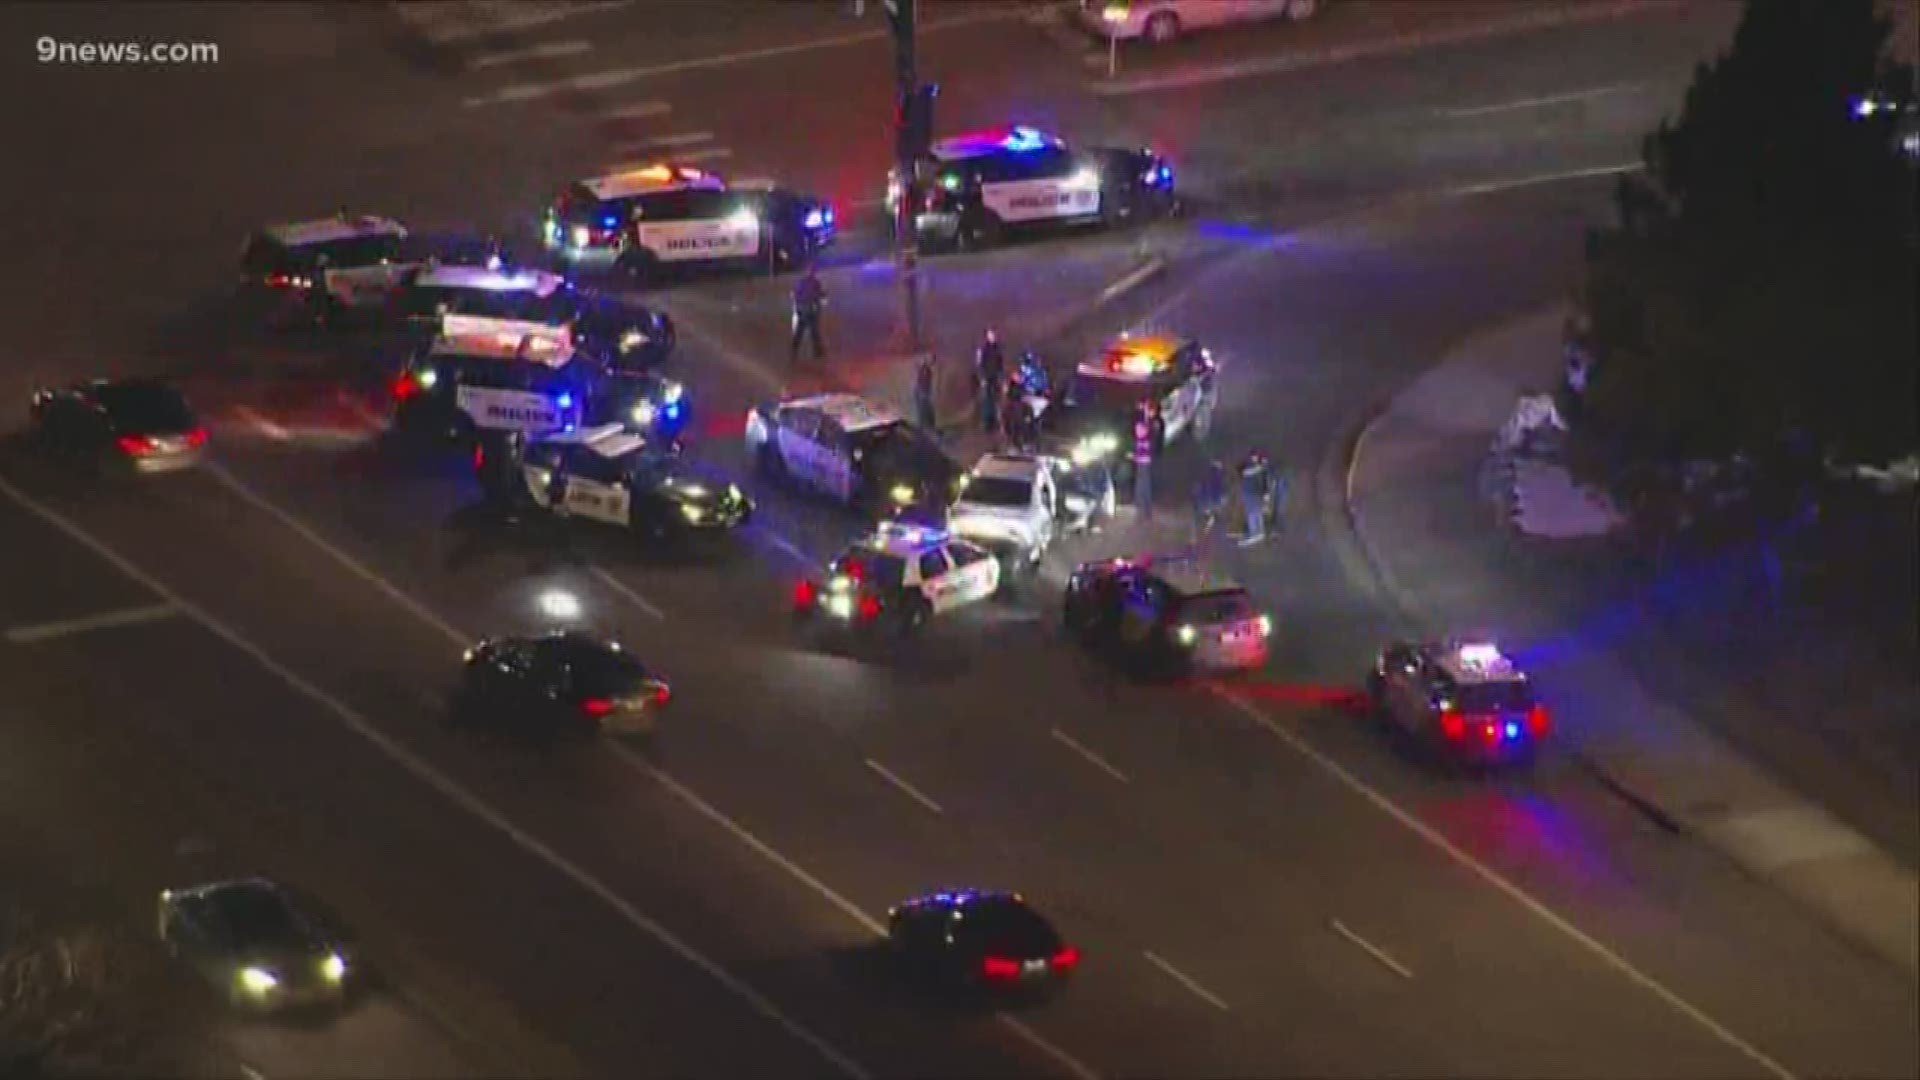 During the chase, the suspects rammed a police car, according to police. They eventually ended the pursuit with a PIT maneuver near 92nd and Sheridan,